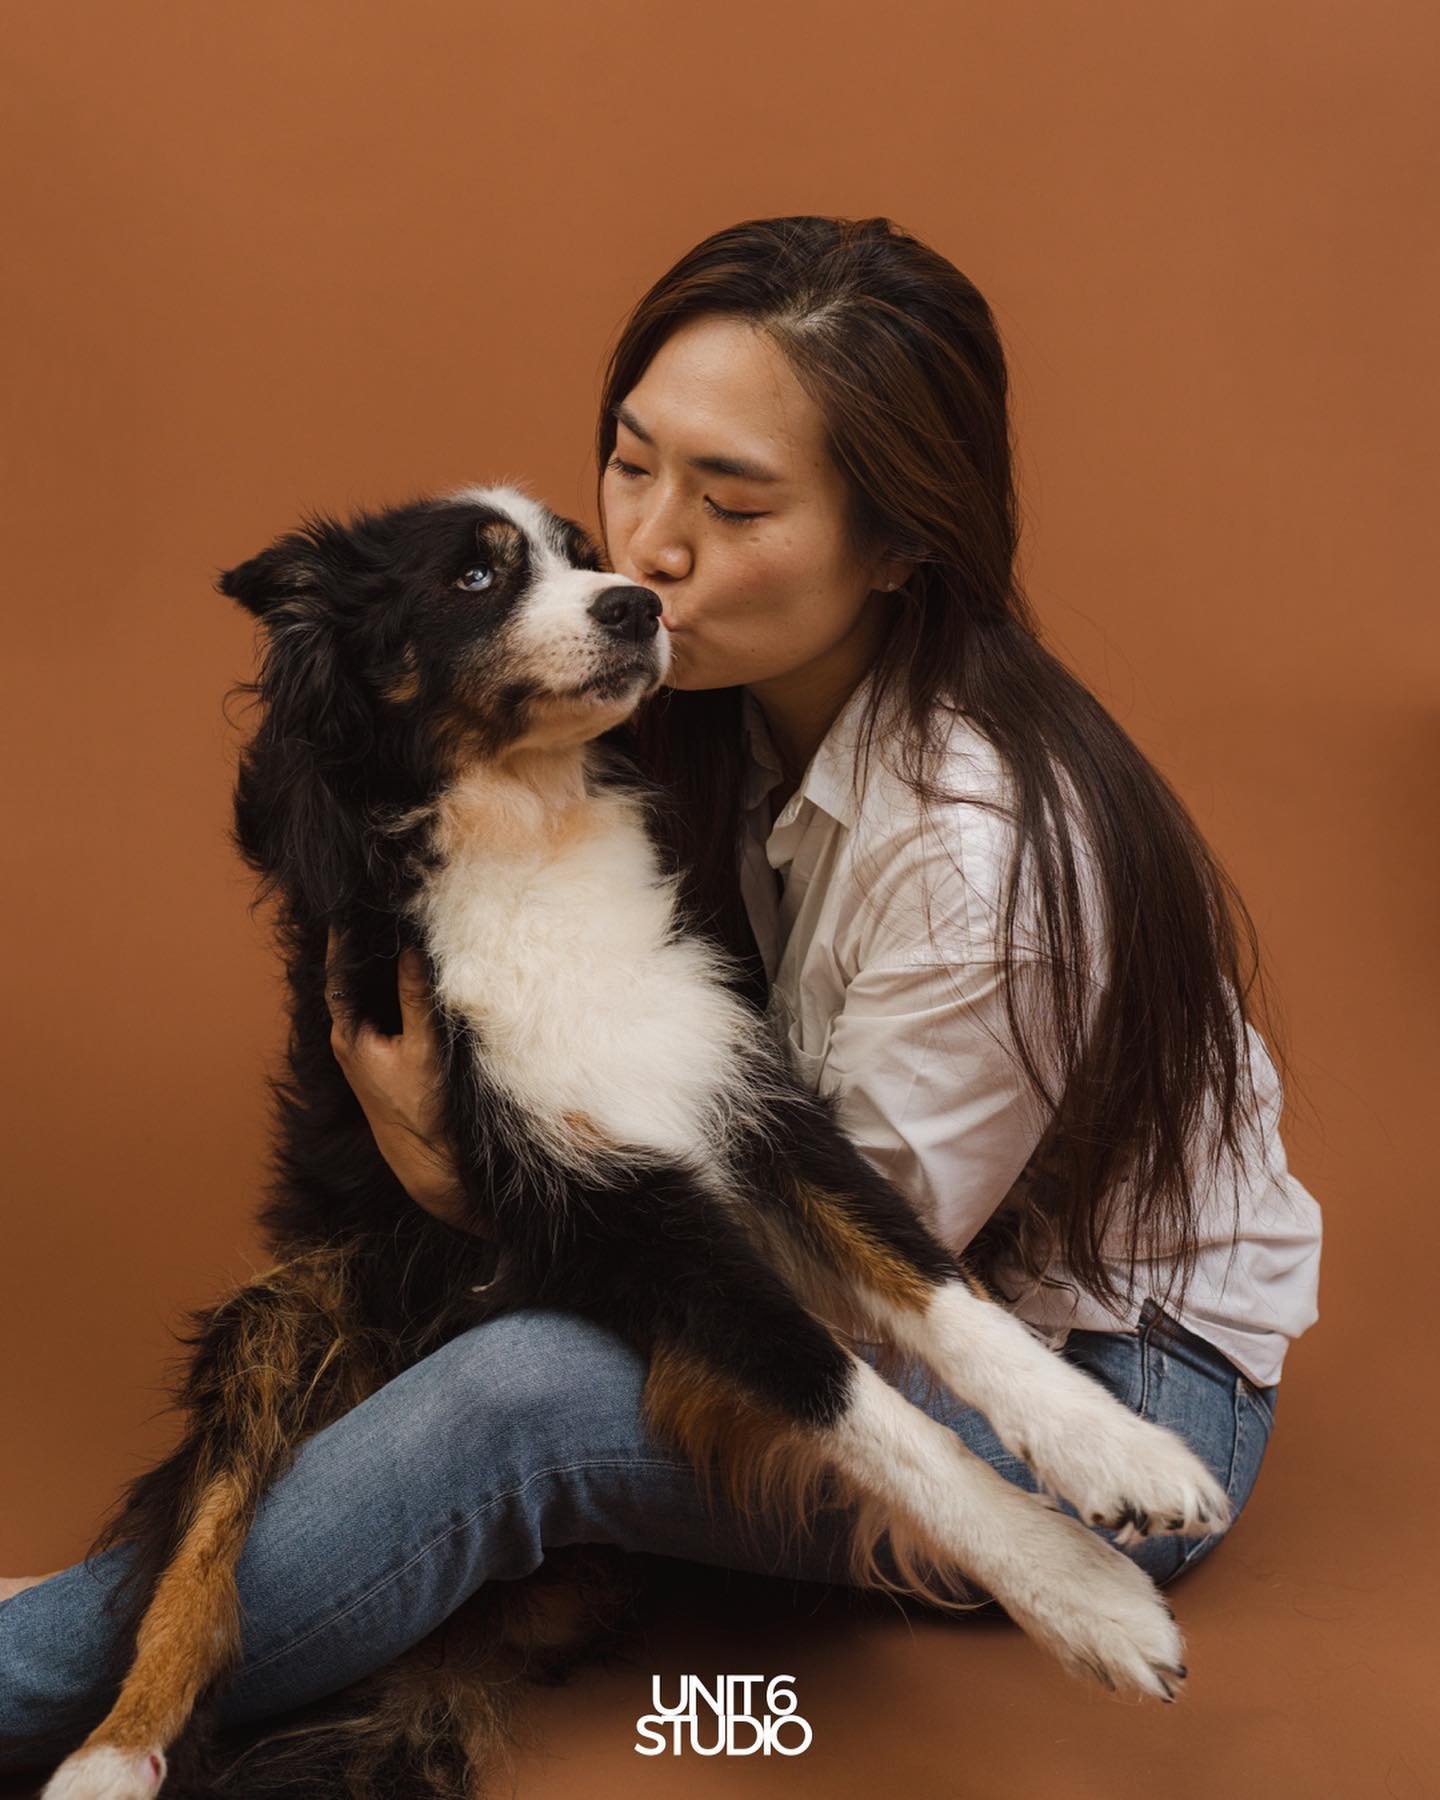 Life is better with a furry friend by your side. 15 years of unconditional love, endless snuggles, and paw-some memories! 🐾💕 #PawFriendsForever 

Our mini portrait sessions are back! Message us to know more info ✨